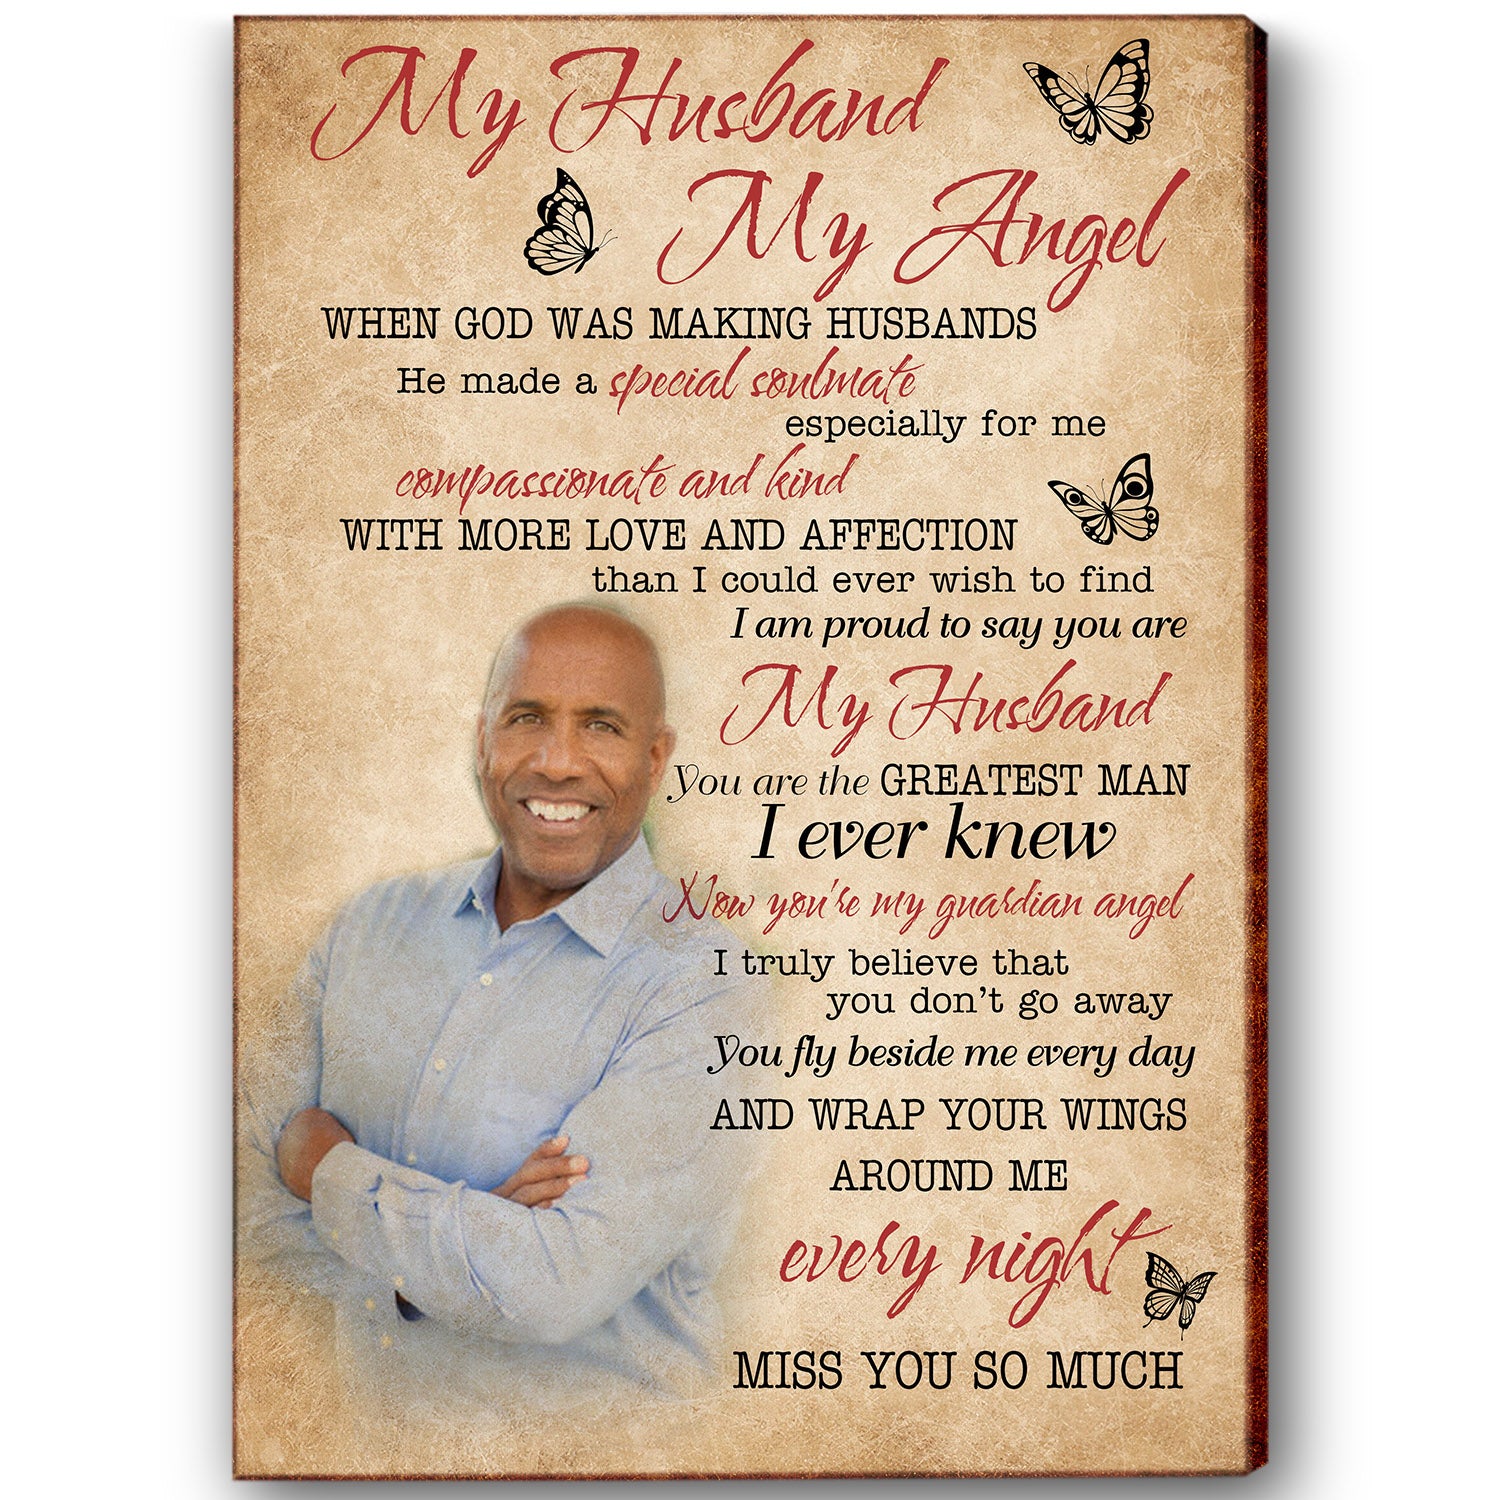 Personalized Memorial Canvas| My Husband My Angel| Memorial Gift for Loss of Husband| Husband Remembrance| Sympathy Gift for a Widow, Grieving Wife| Bereavement Keepsake| N1938 Myfihu